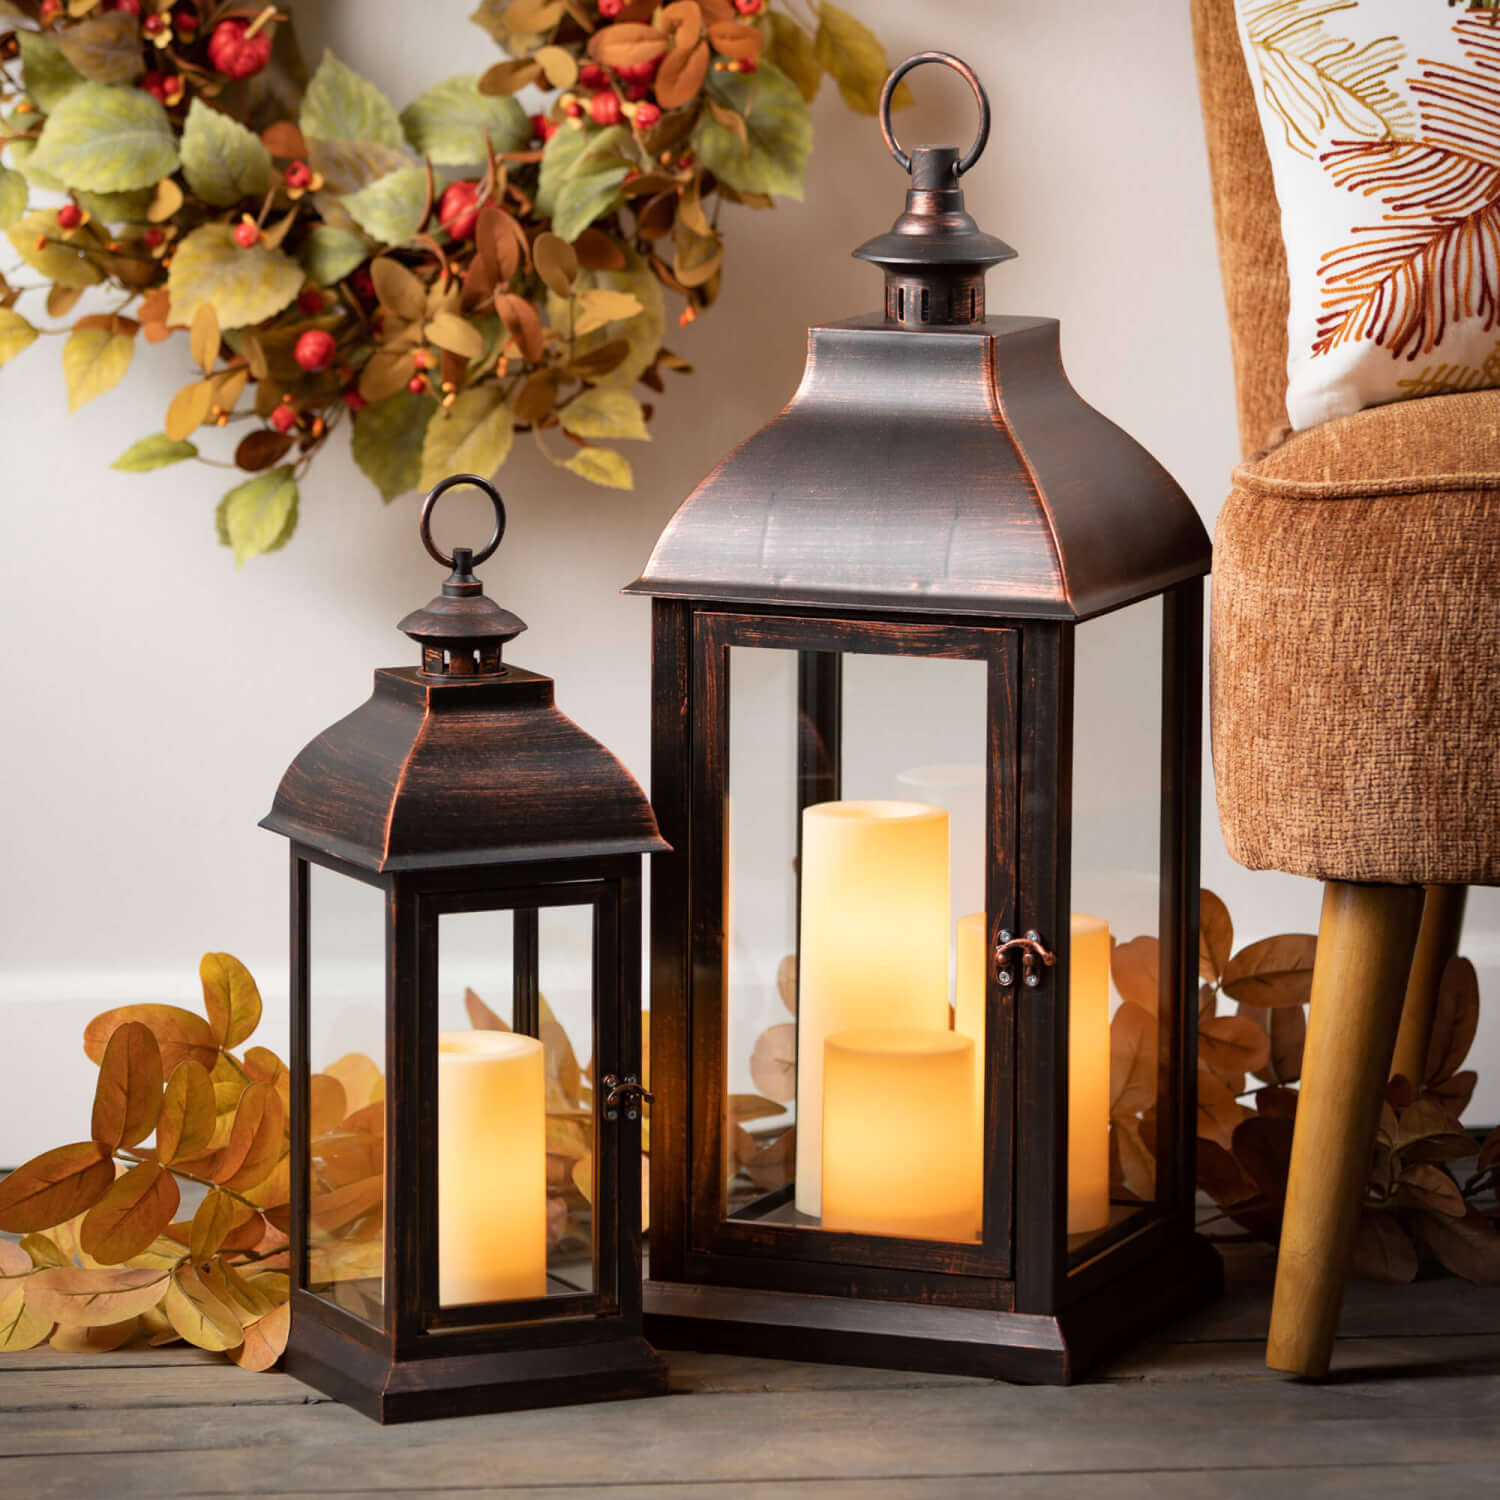 Square Lantern and 3 LED Candles Elevate Home Decor - Lanterns